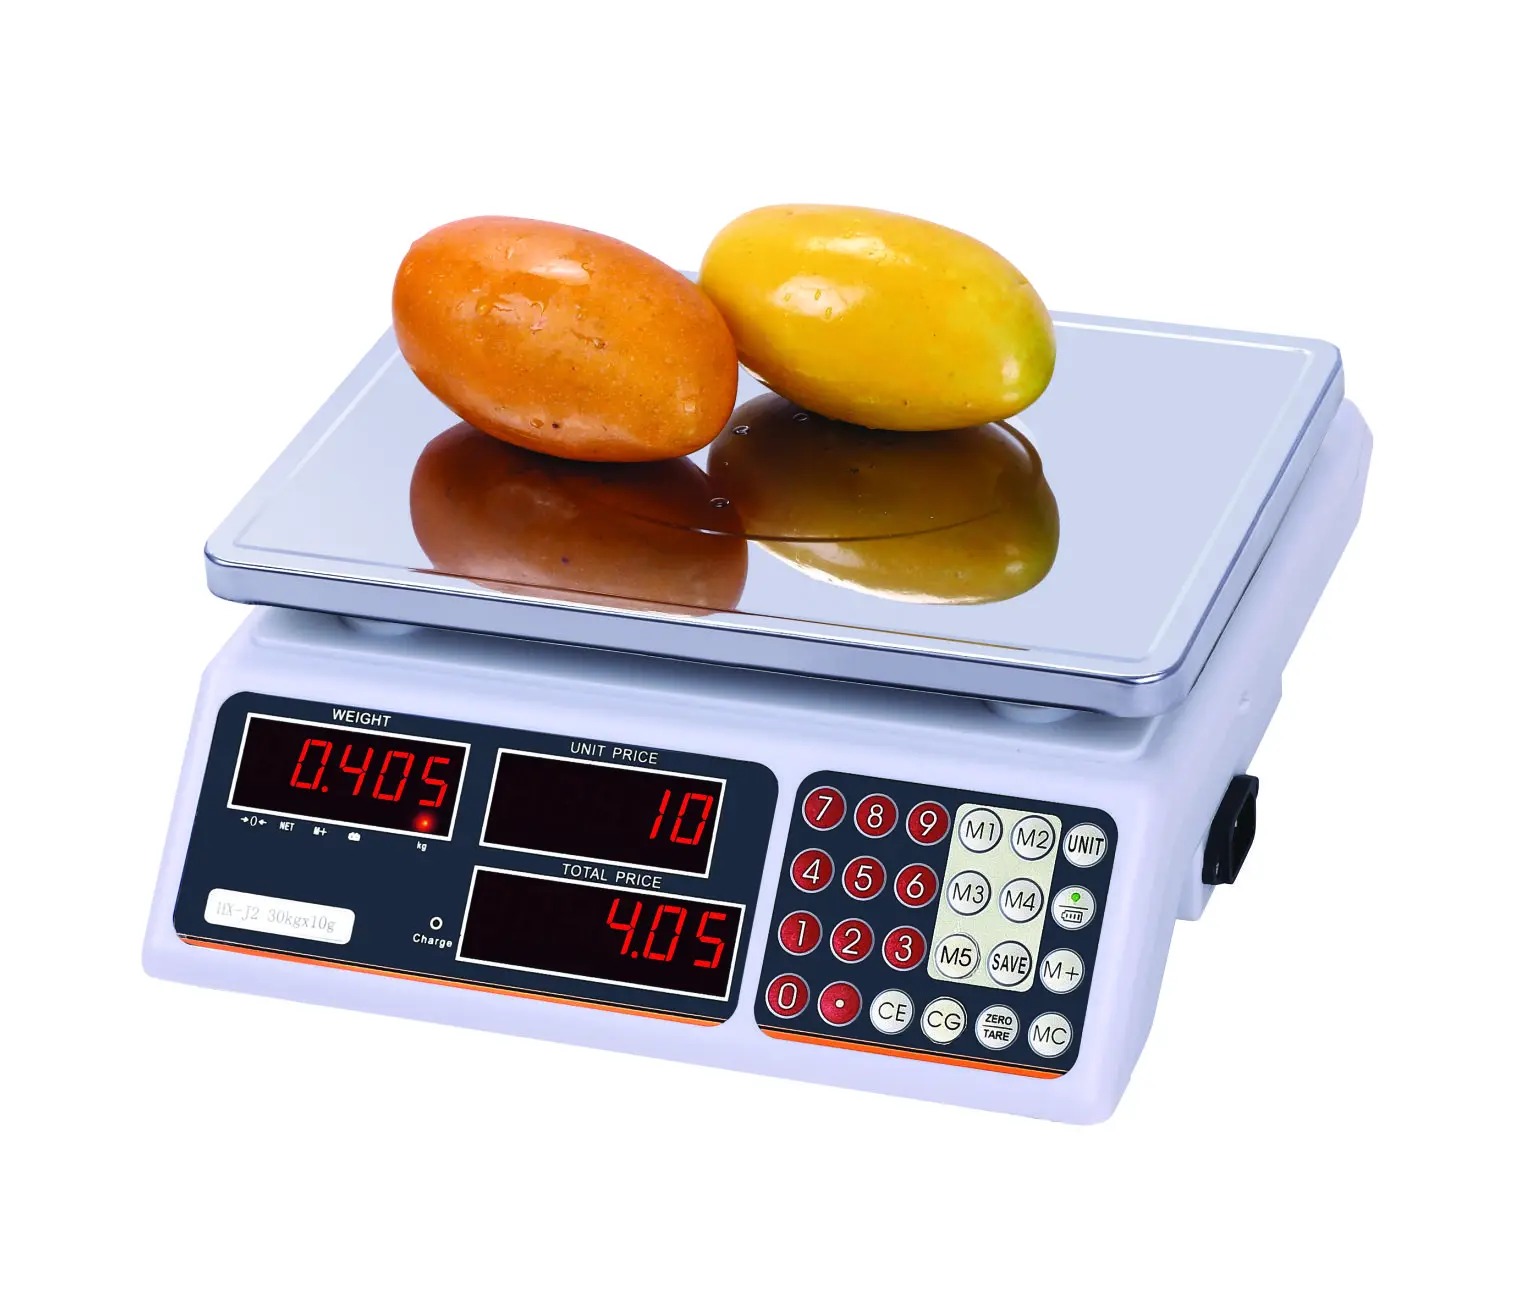 

Digital price Scale kitchen scale 3Kg 0.5g 6Kg 1g 15Kg 2g 30kg 5g Food Scales Digital Weight Gram and Oz Scale with LED/ Tare